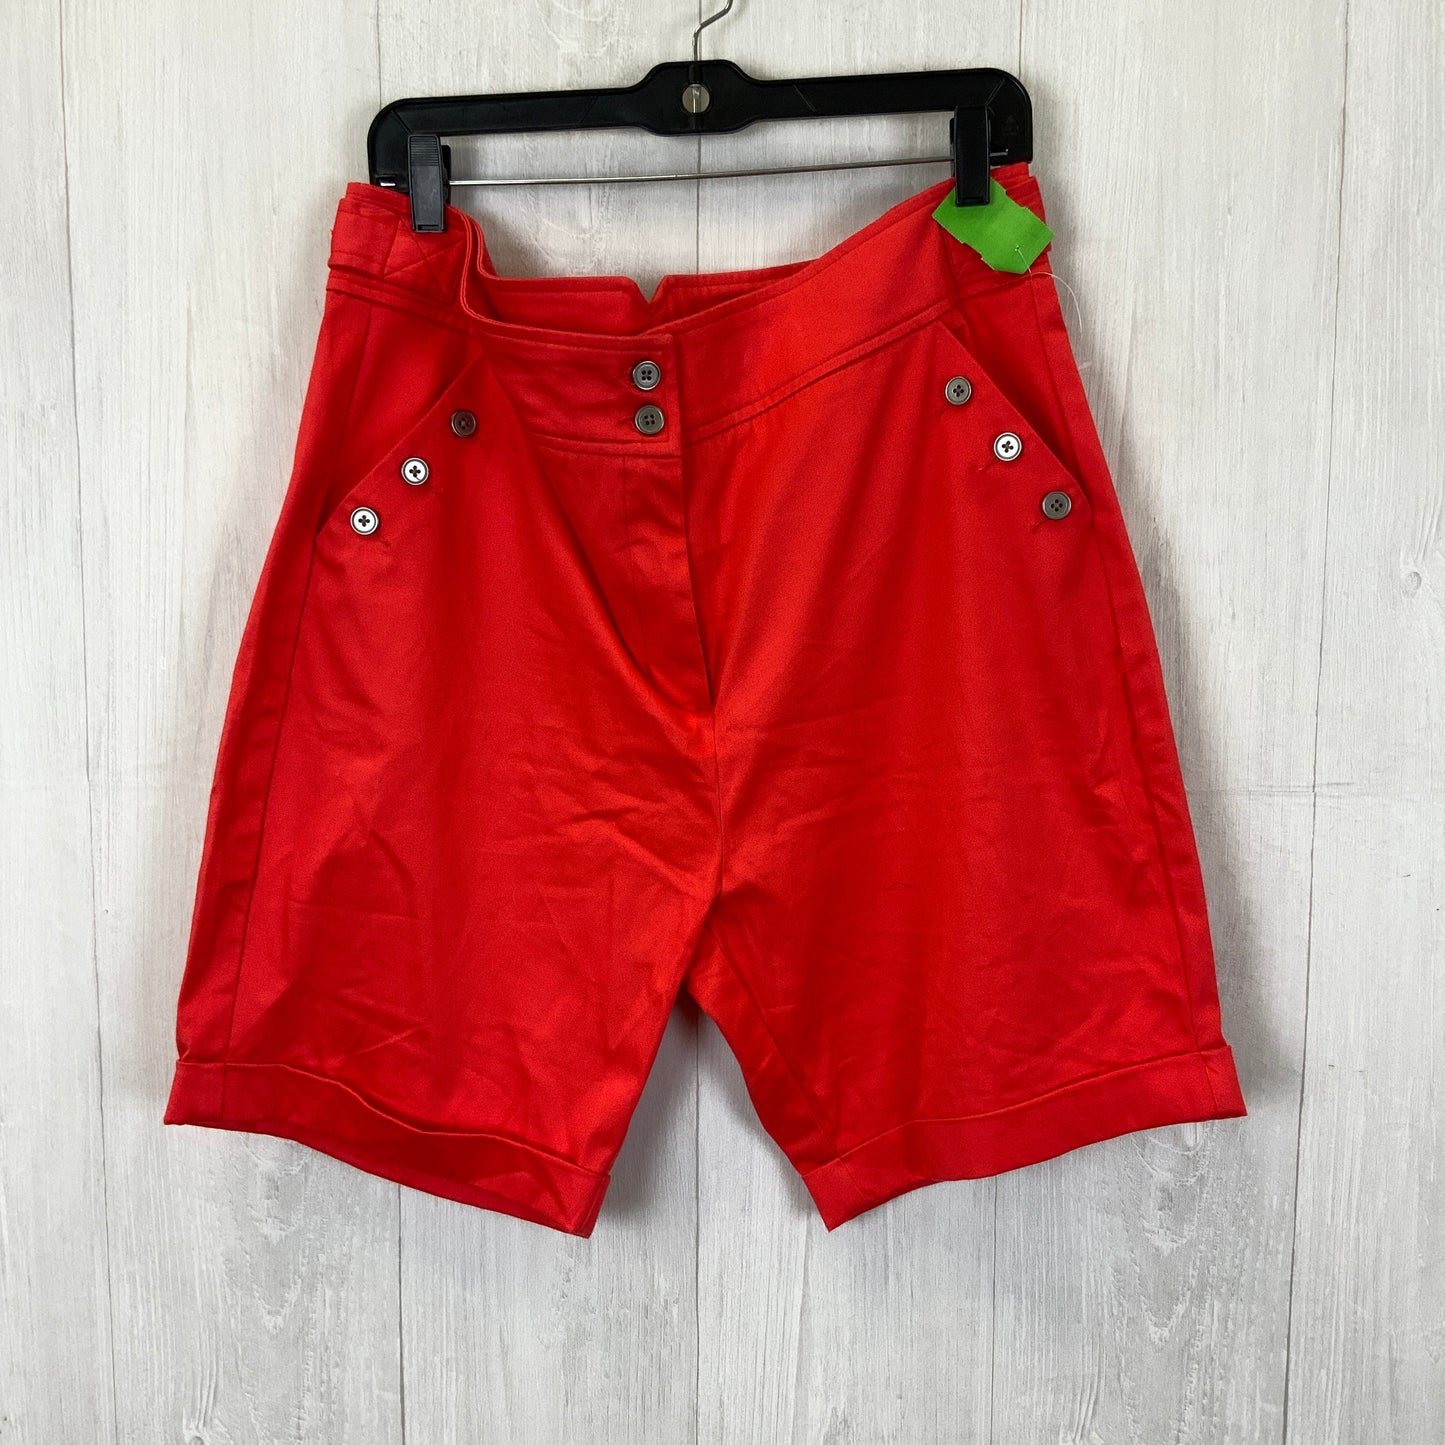 Coral Shorts Clothes Mentor, Size 16